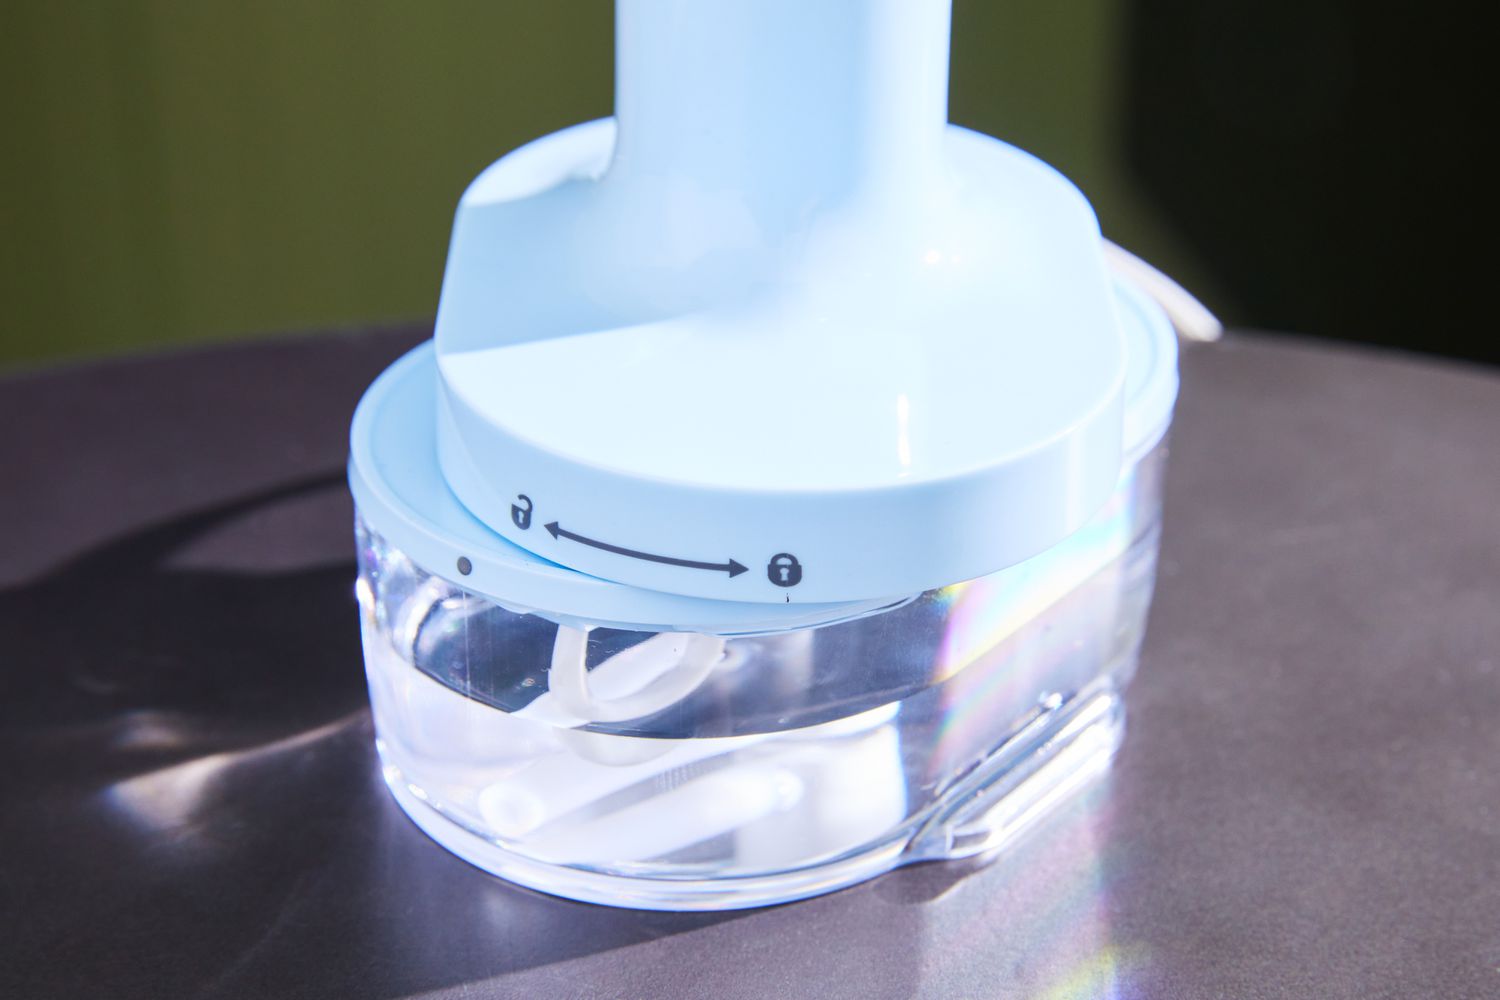 Close-up of the water tank of the Proctor Silex Compact 2-in-1 Garment Steamer/Iron.